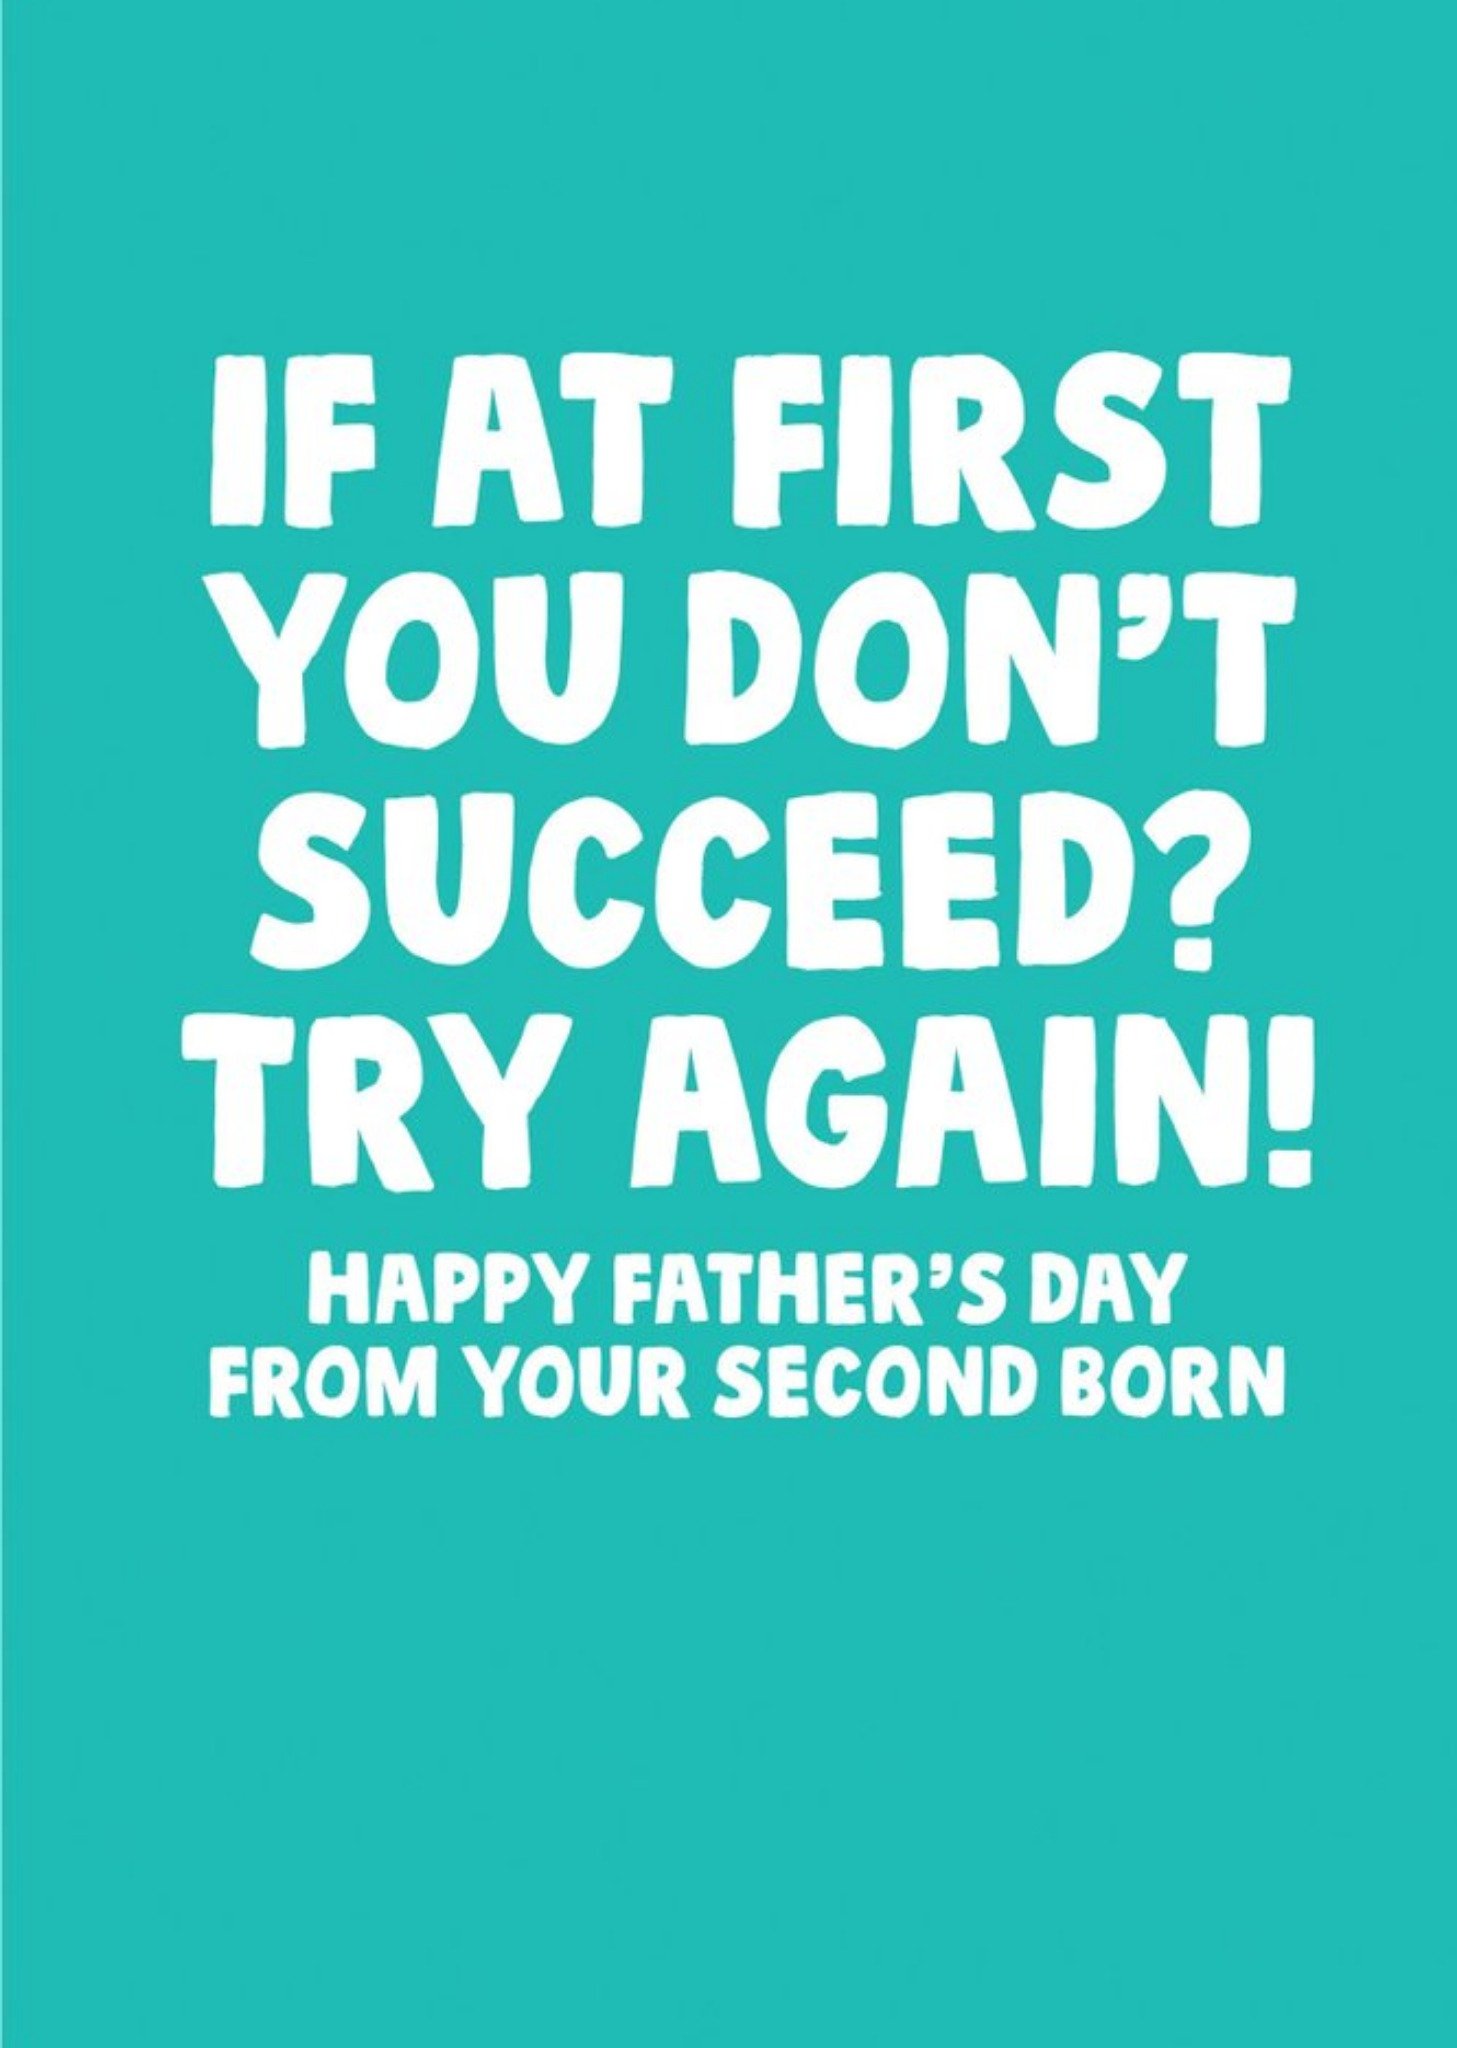 Moonpig Funny If You Don't Succeed Try Again Father's Day Card Ecard